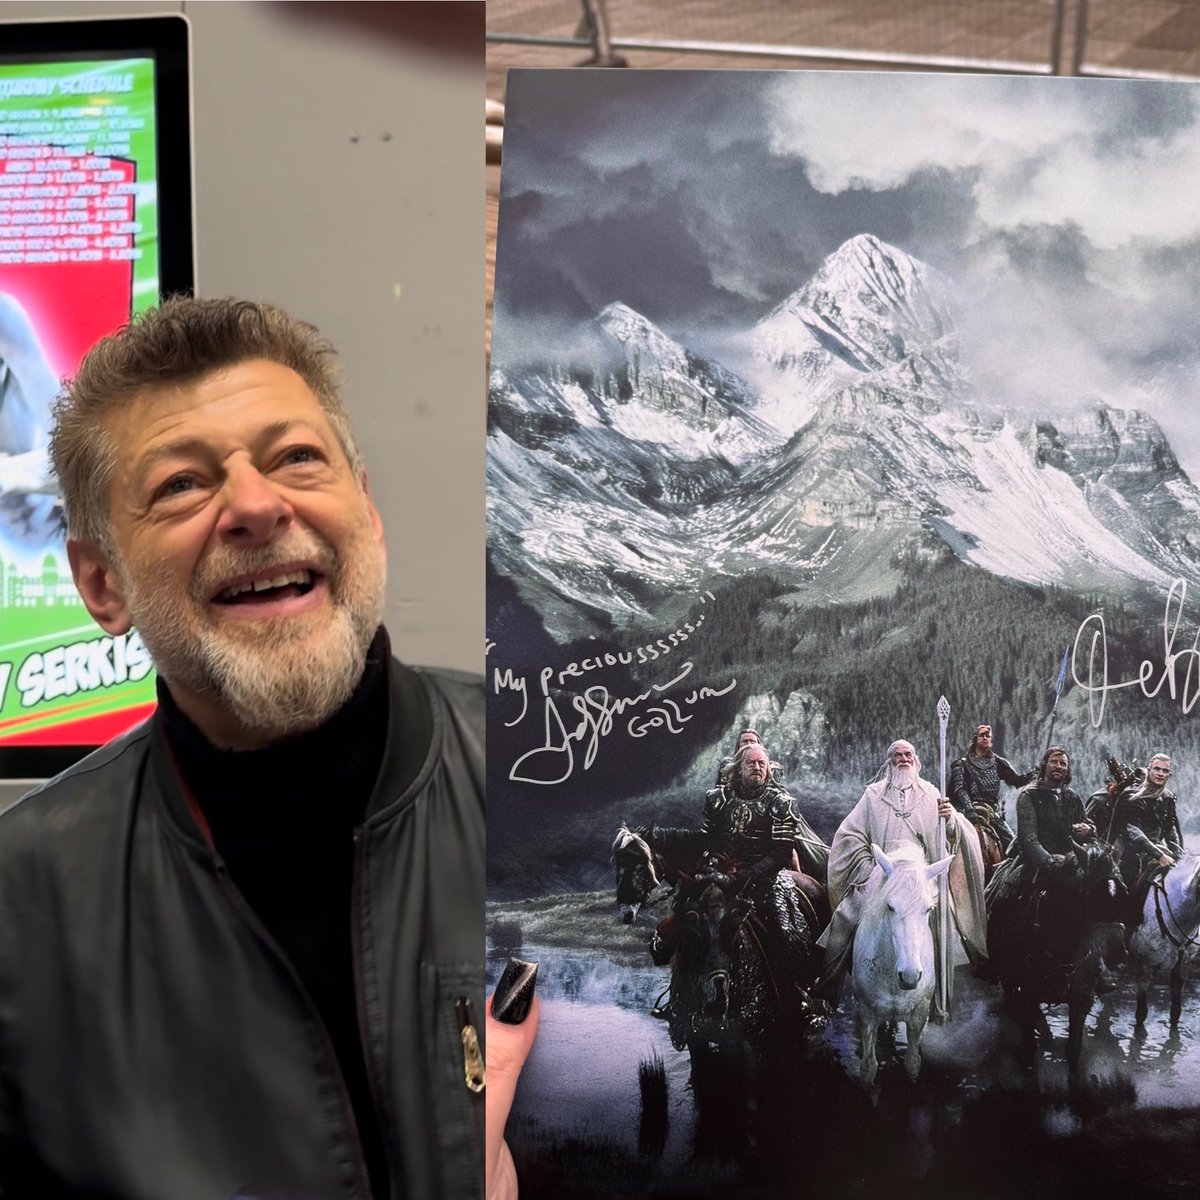 Still laughing at my conversation with Andy Serkis, brought him a displate I had  bought prior to his announcement to sign which he wasn’t on and he said “I’m gonna pretend I’m somewhere in the mountain eating a fish” 🤣 such a nice guy